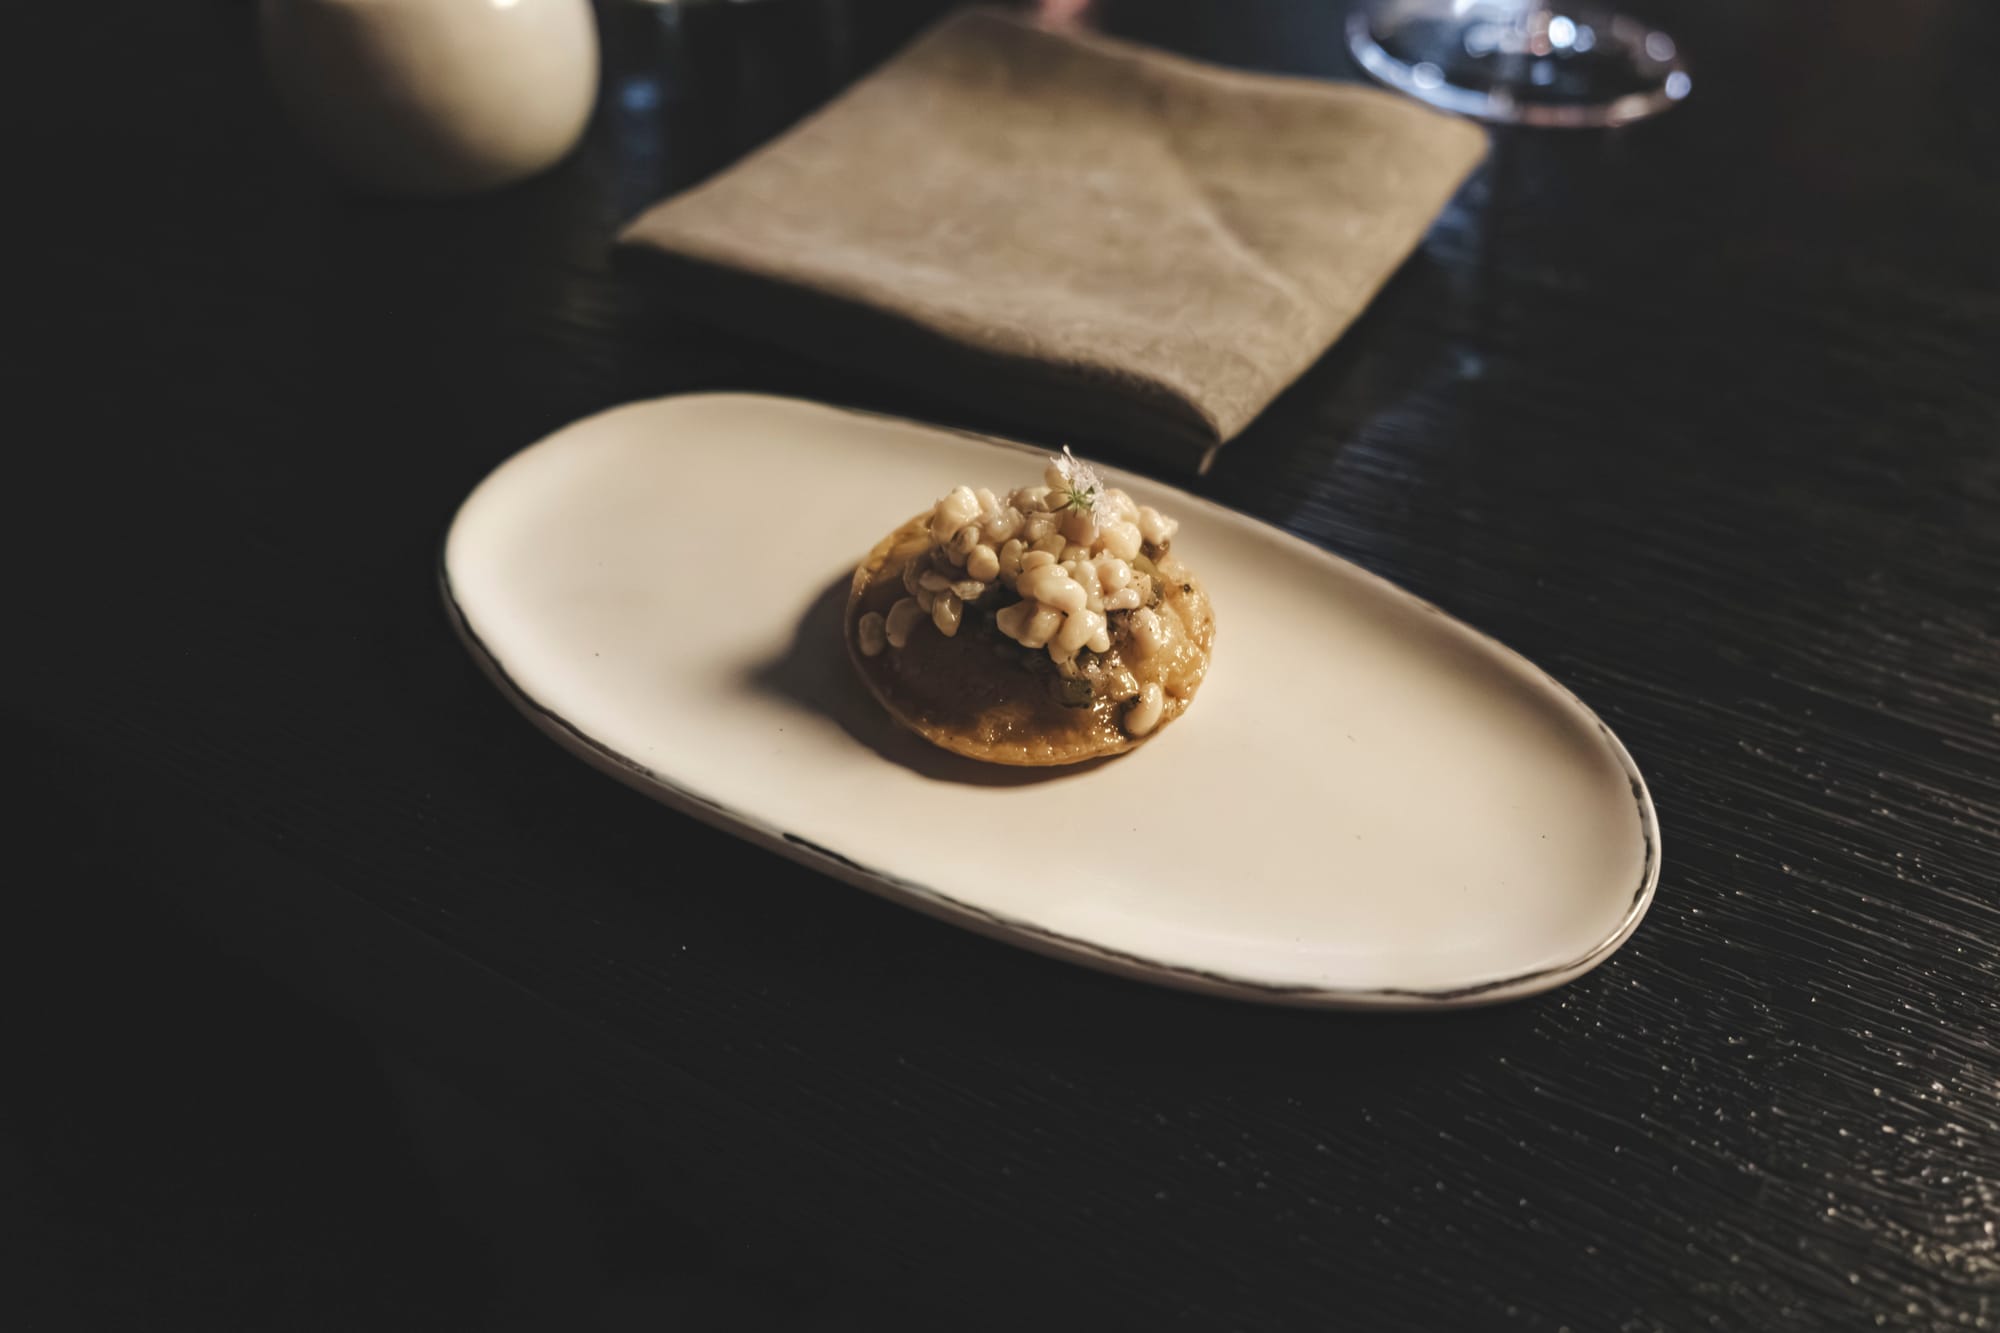 Pujol [REVIEW] – The $3,495 MXN Tasting Menu Experience of Mexico City